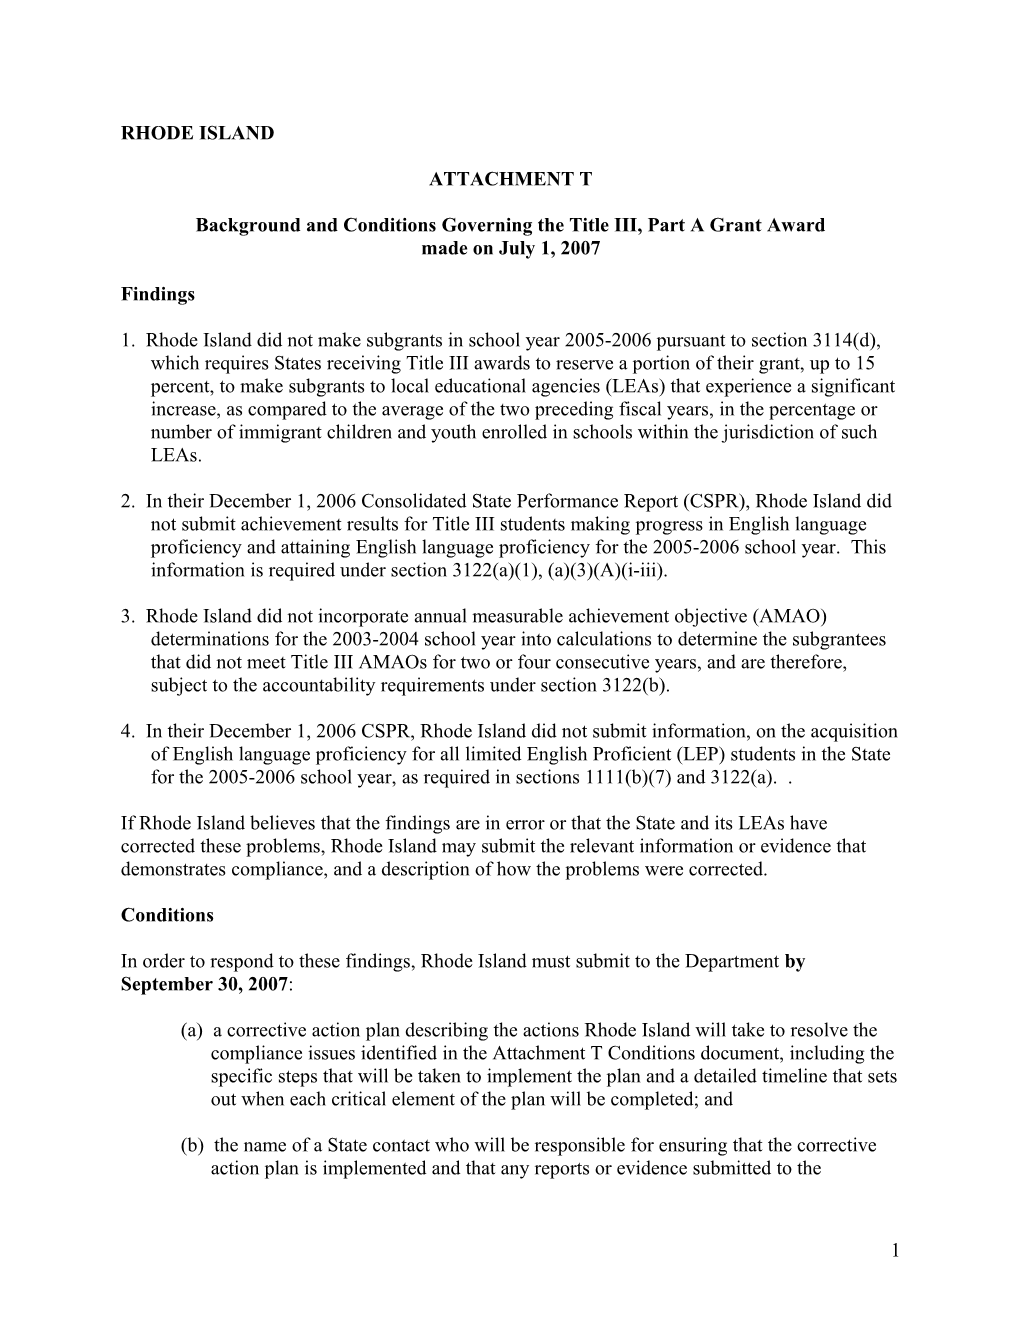 Rhode Island's 2007 Attachment T - Background and Conditions Governing the Title III, Part